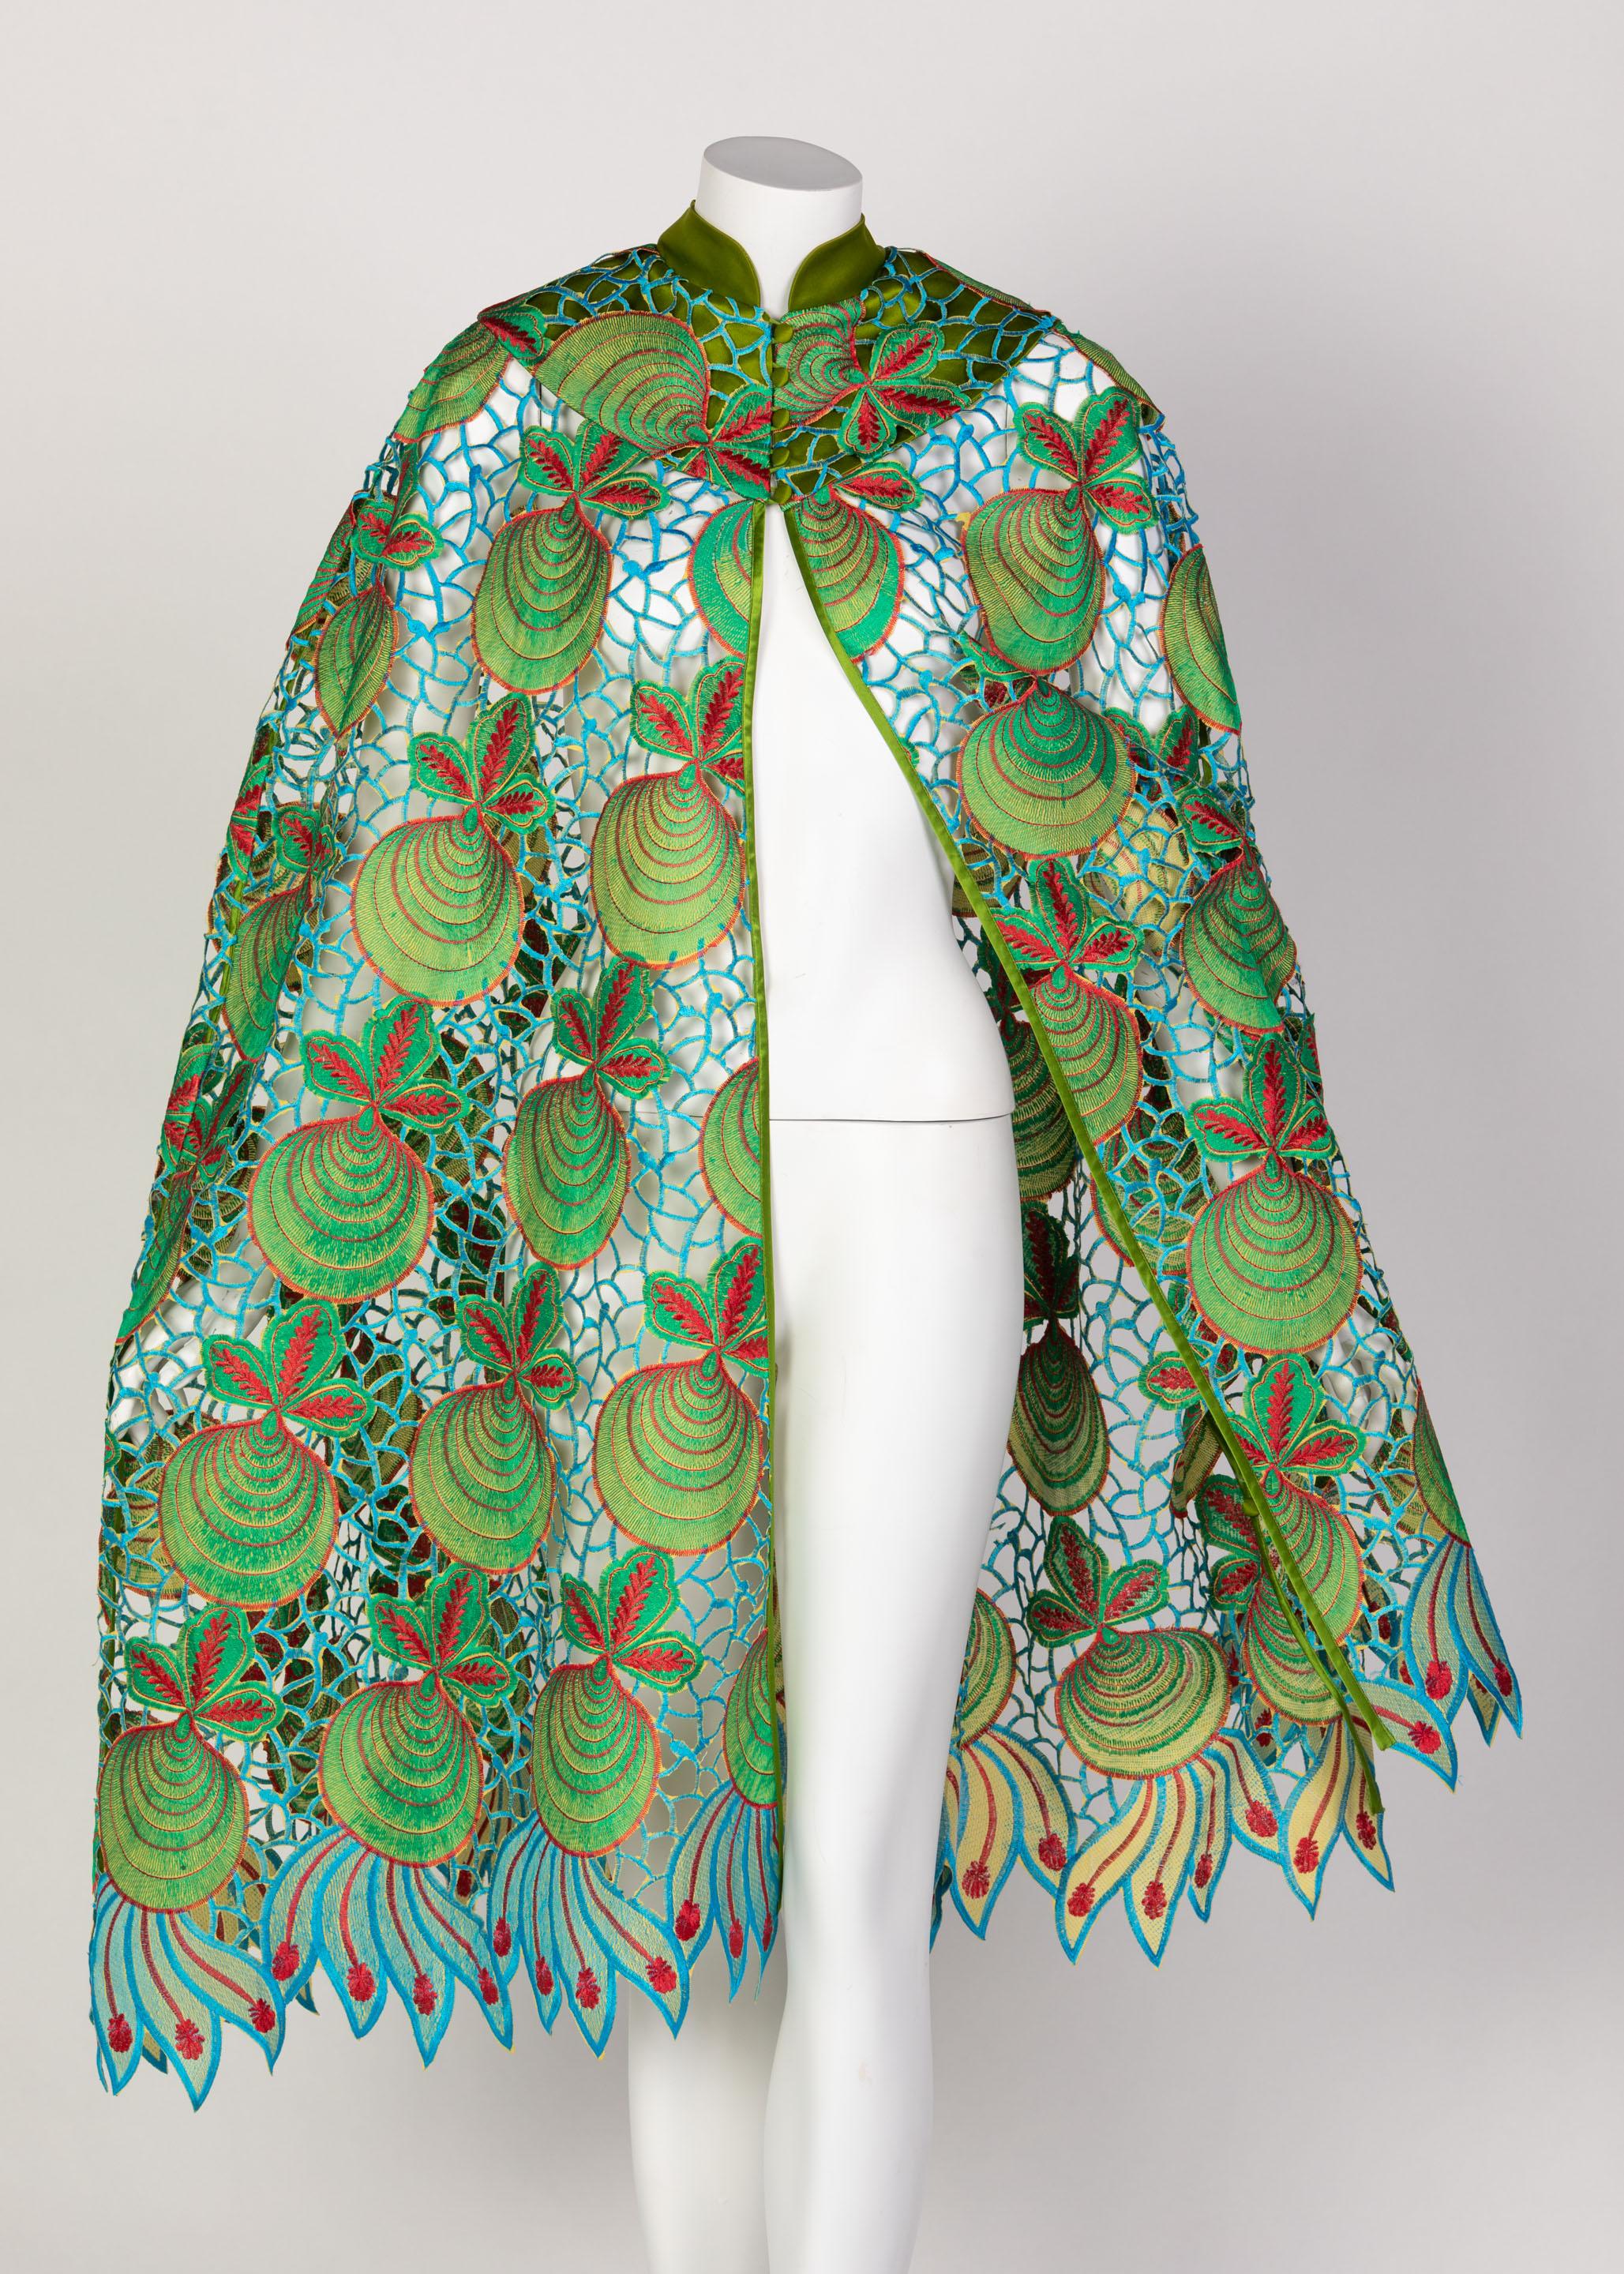 Duro Olowu Green Blue Red Cut Out Silk Lace Cape, 2012 In Excellent Condition For Sale In Boca Raton, FL